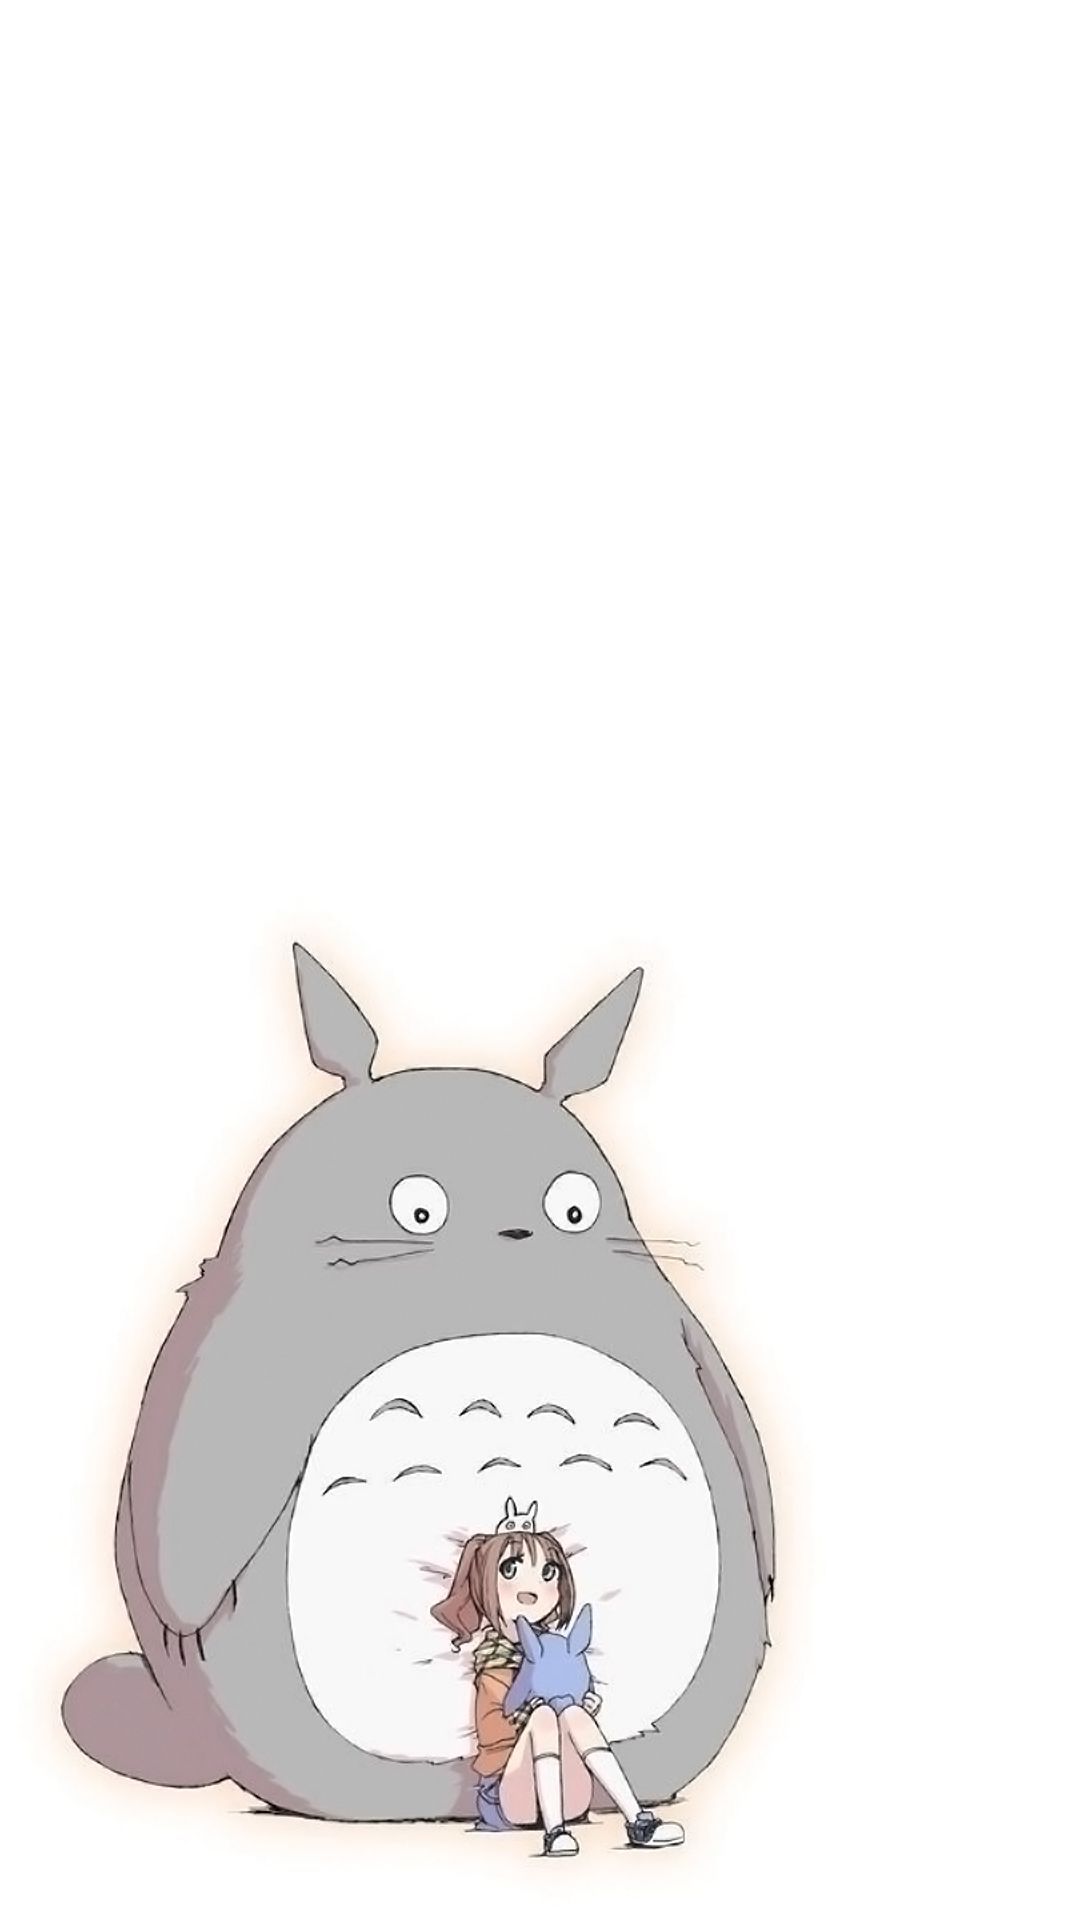 Download Totoro Anime wallpaper by Mioore - 53 - Free on ZEDGE™ now. Browse  millions of popular anime Wal… | Anime wallpaper download, Anime scenery,  Ghibli artwork